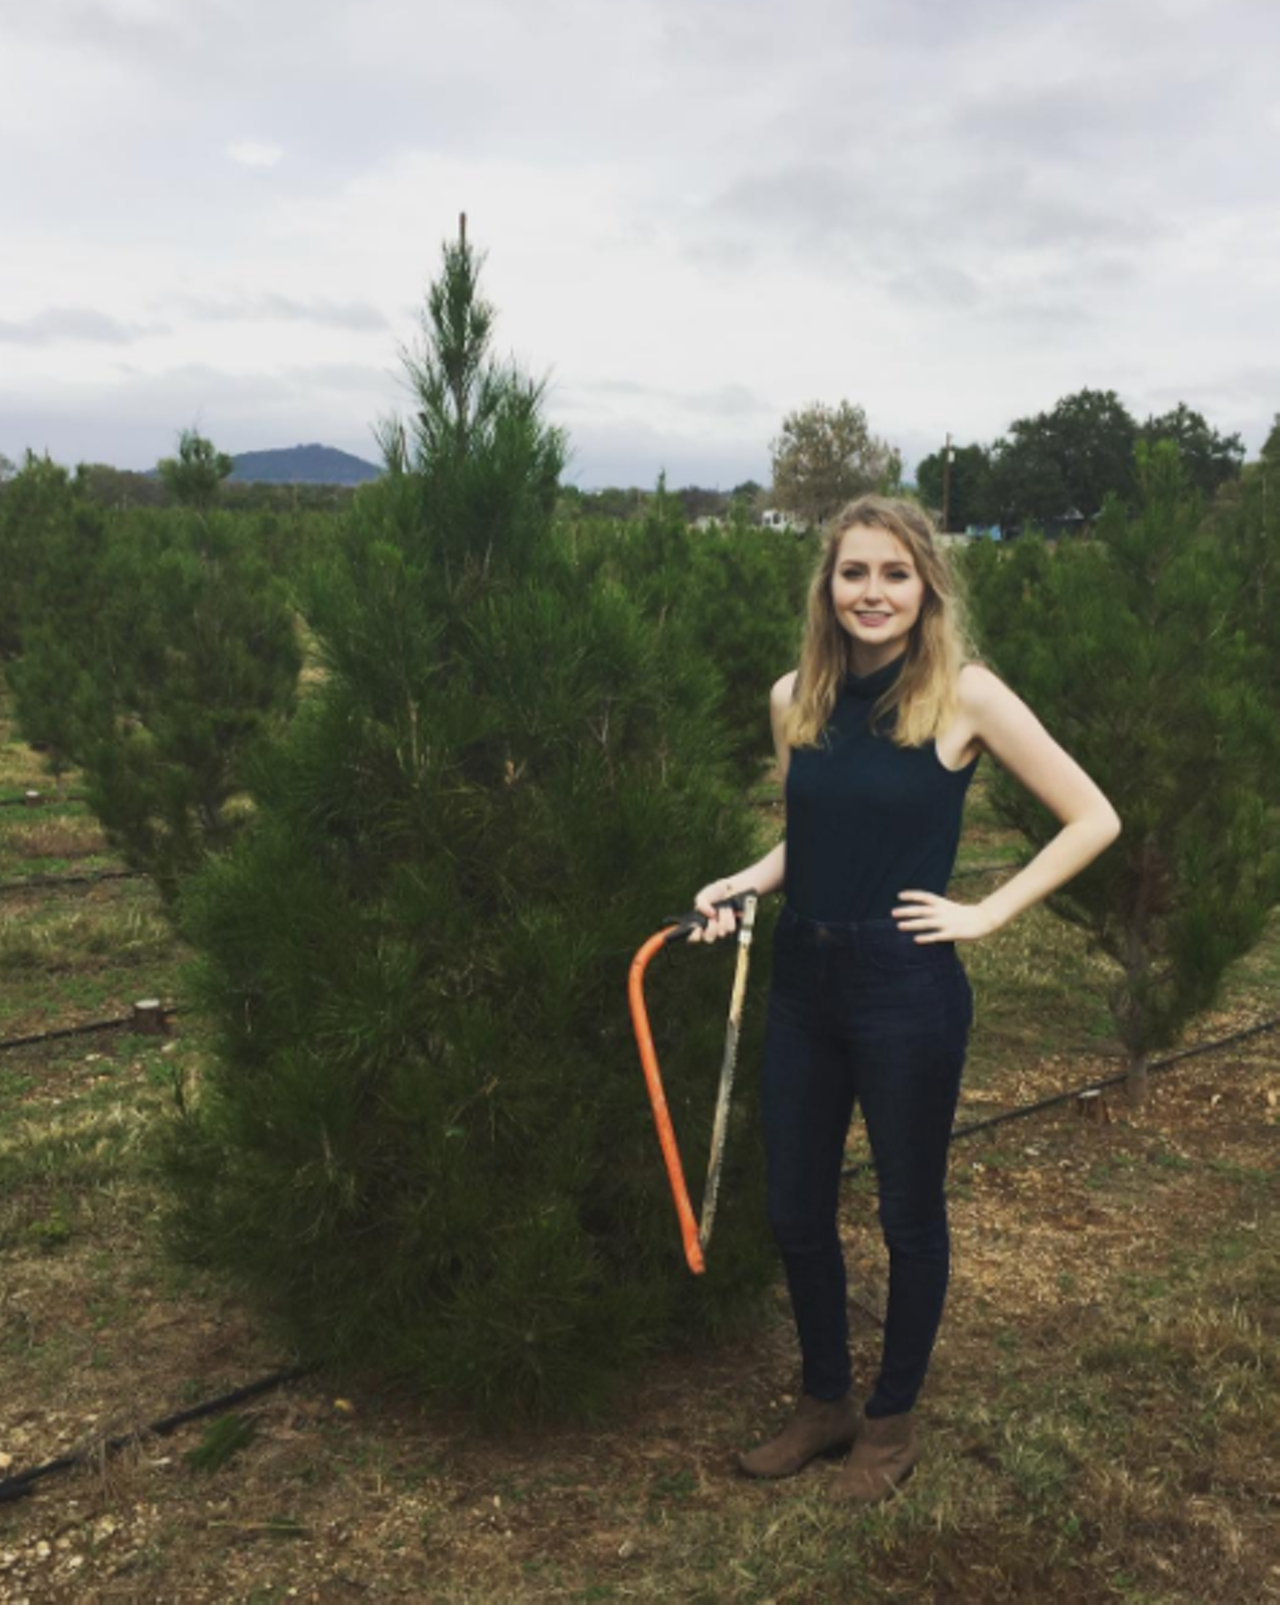 Find the perfect Christmas tree
With Christmas just weeks away it's time to find that perfect Christmas tree. Wether it's an old family tradition or something new to try this year, head out to a Texas farm and choose and cut your own tree to take home. We've even created a handy guide on where to go.  
Photo via Instagram,  oliviagrace537